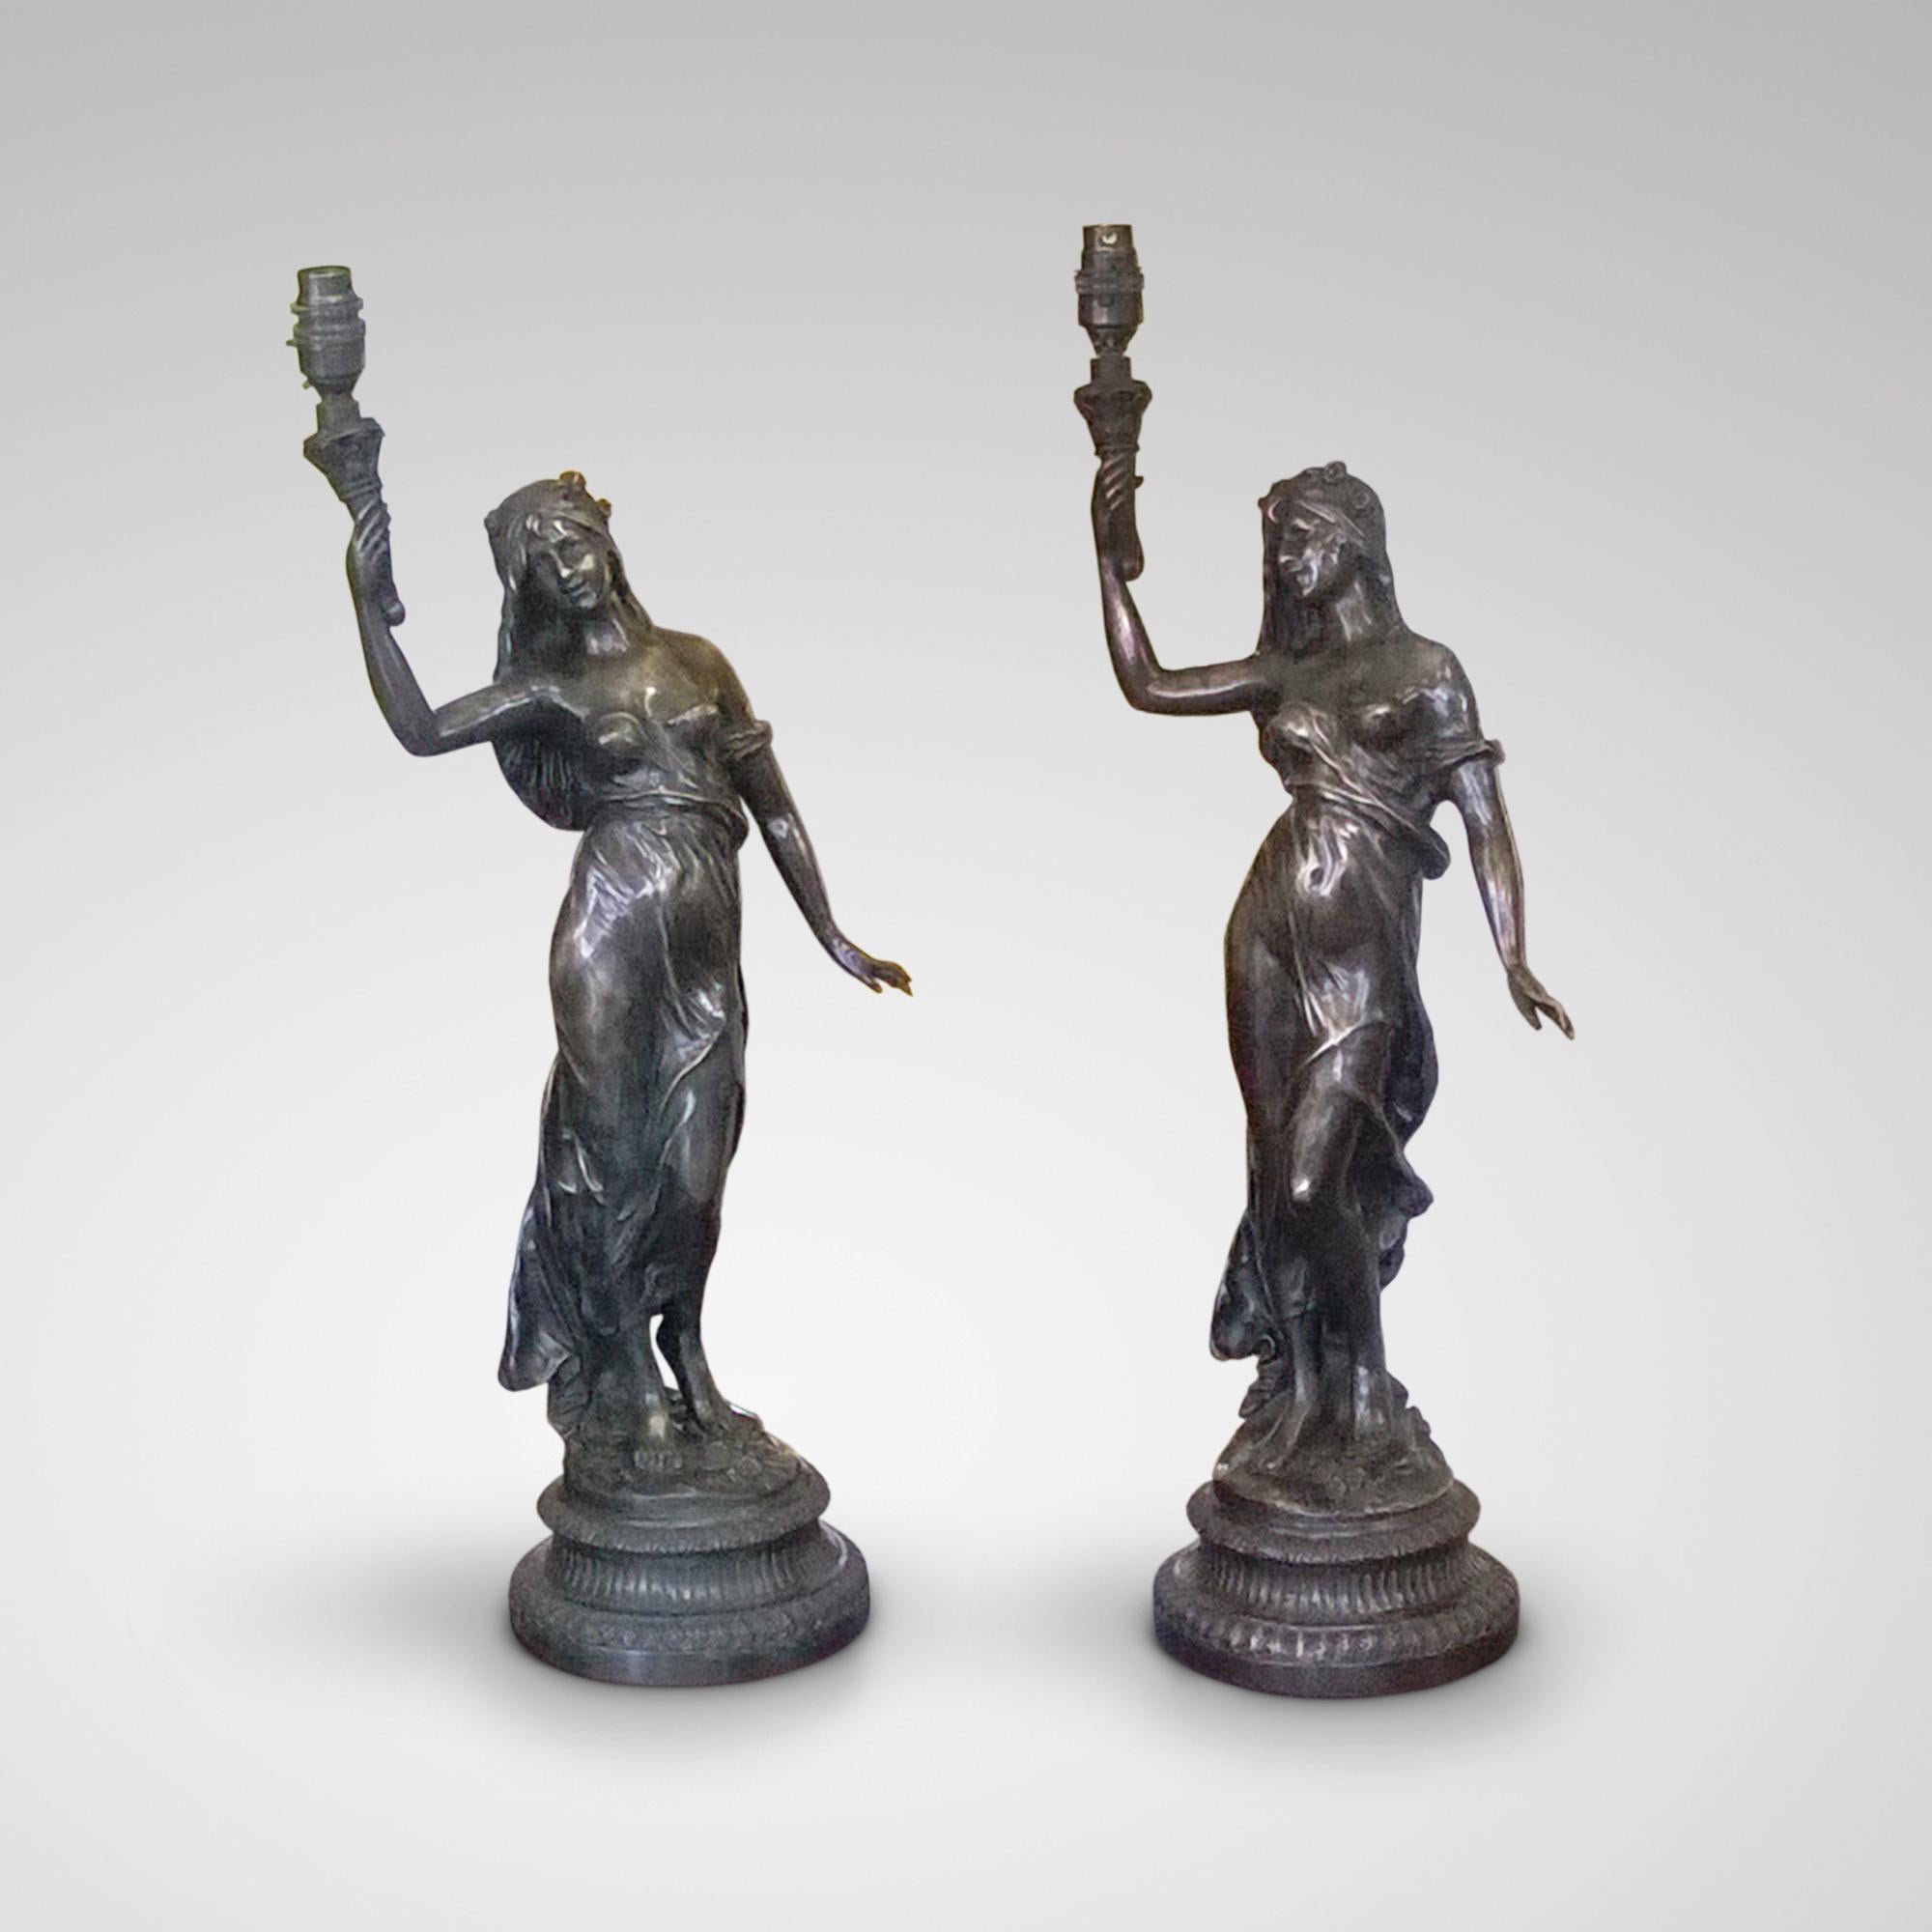 Pair of bronze figurines by Auguste Moreau 1834-1917 (College des Beaux Artes) of the Belle Époque Period, adapted to electric lamps.